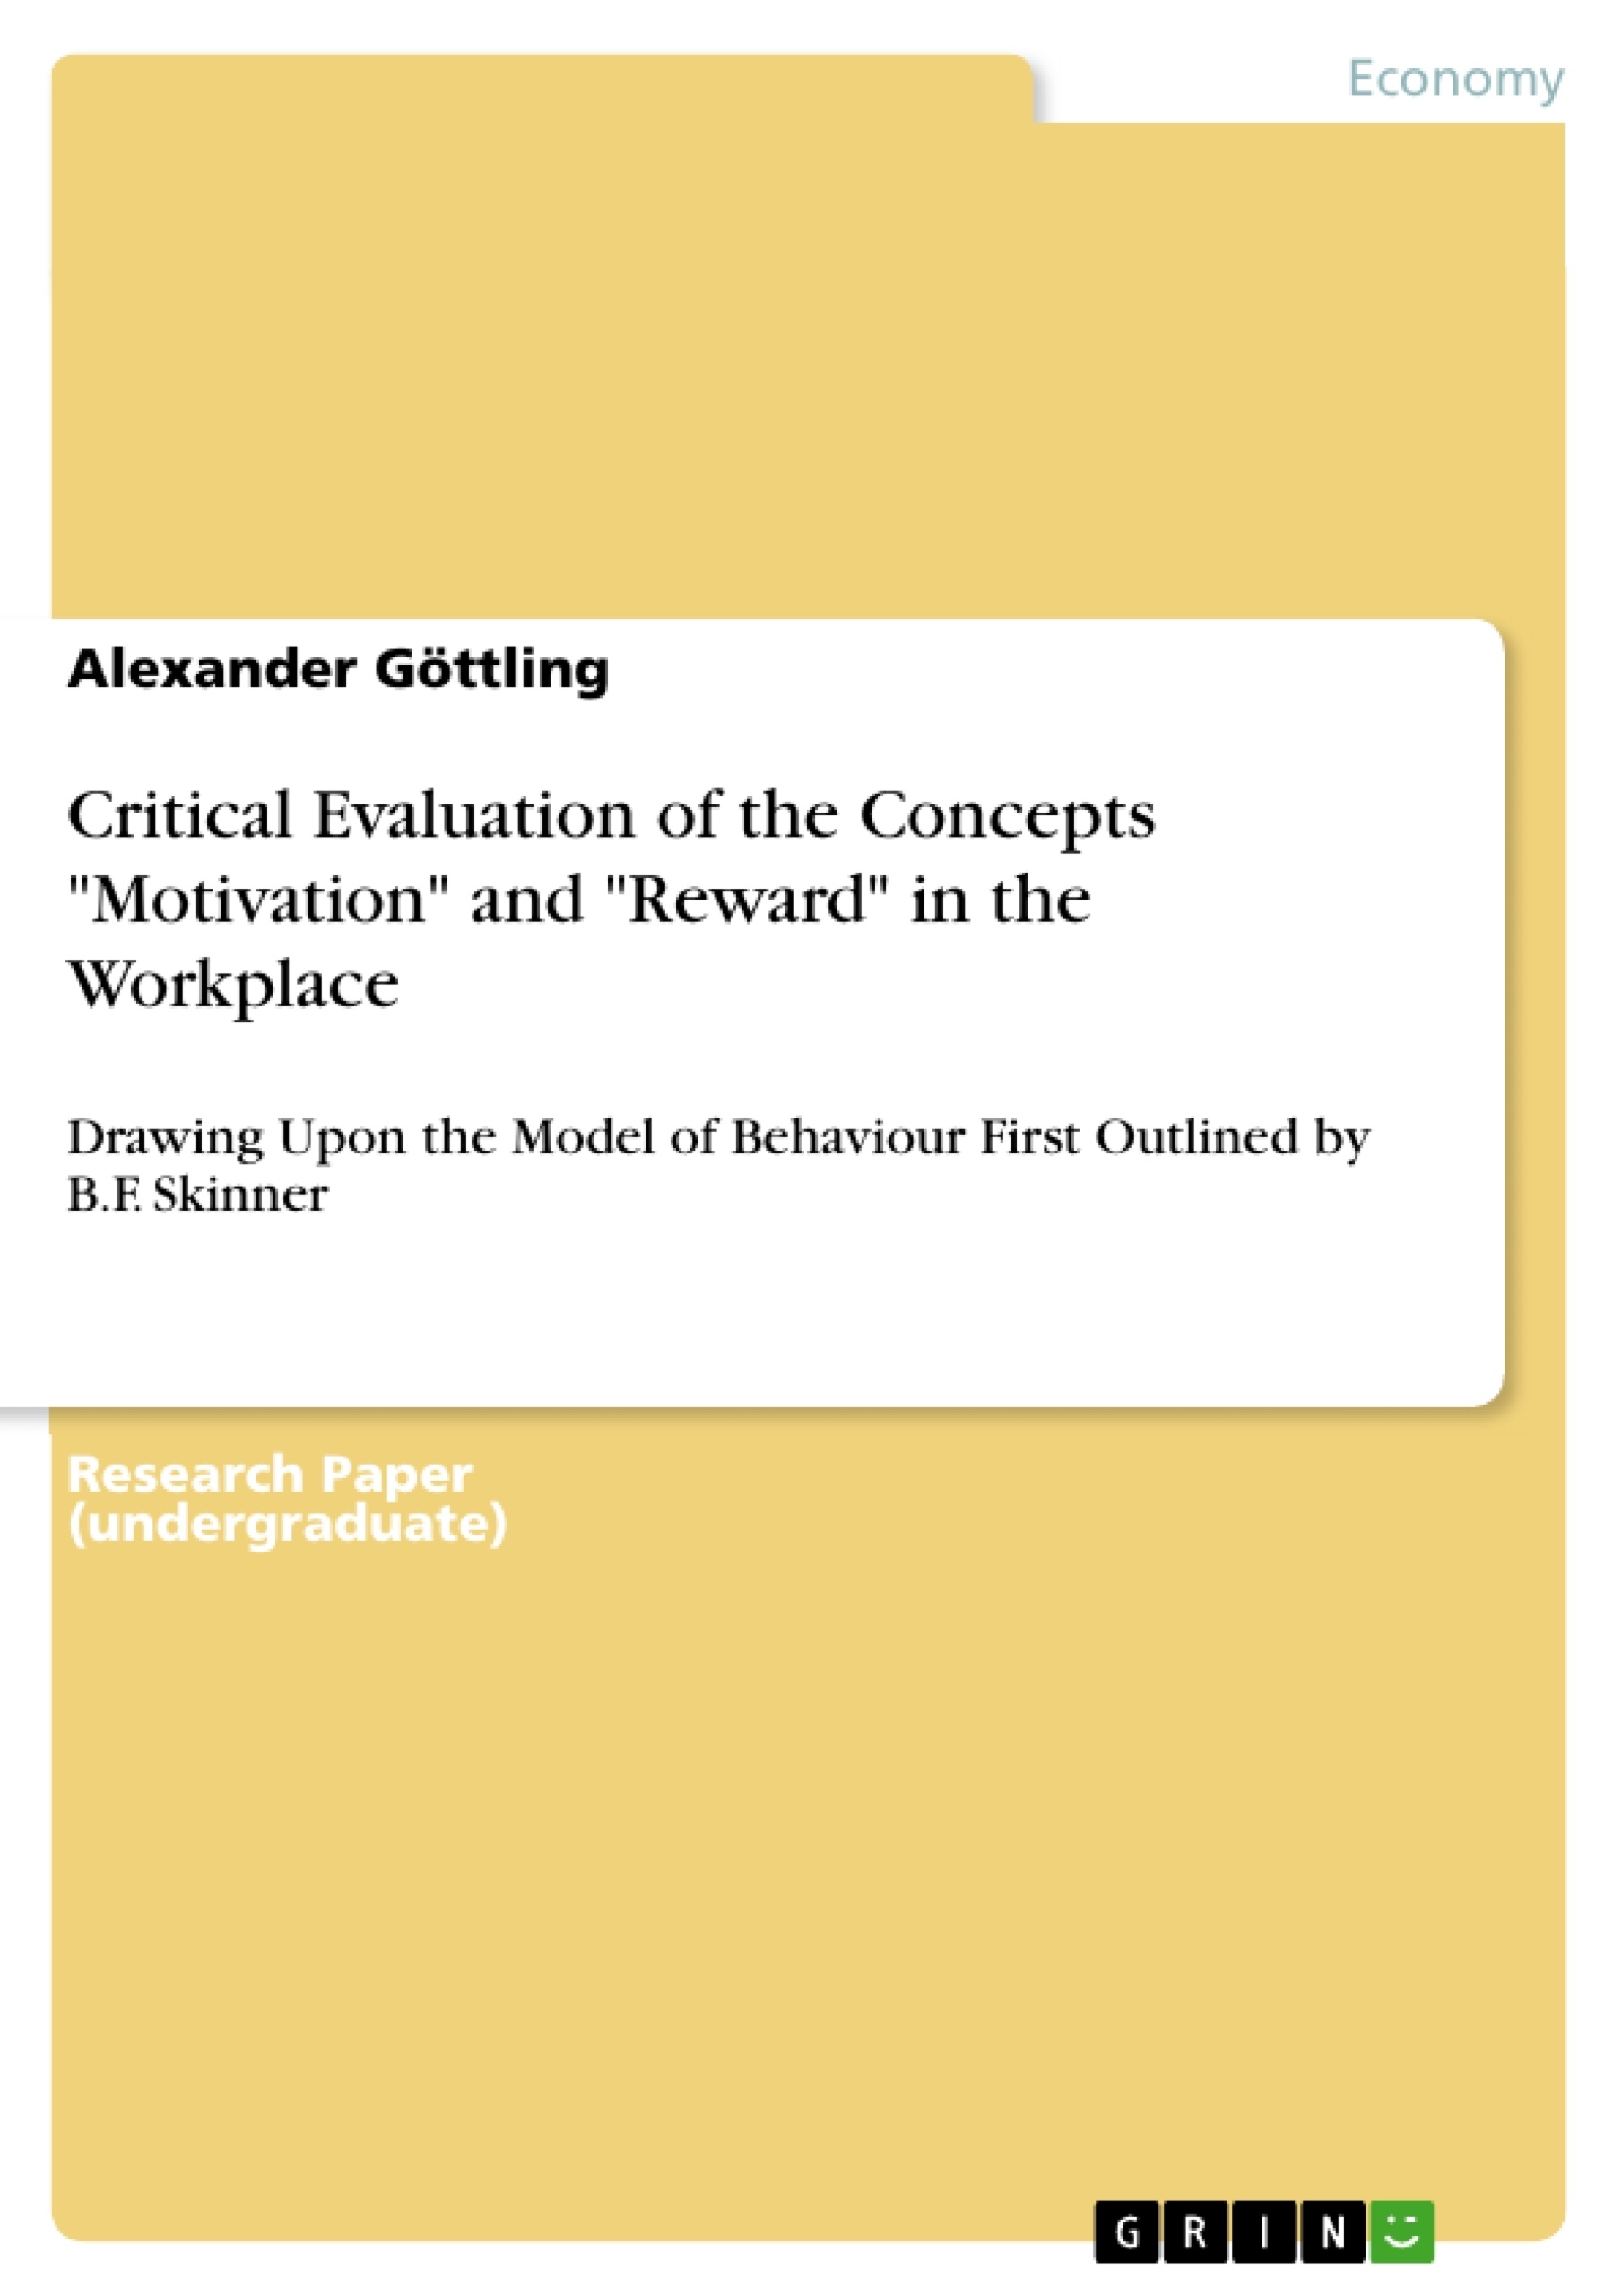 Título: Critical Evaluation of the Concepts "Motivation" and "Reward" in the Workplace